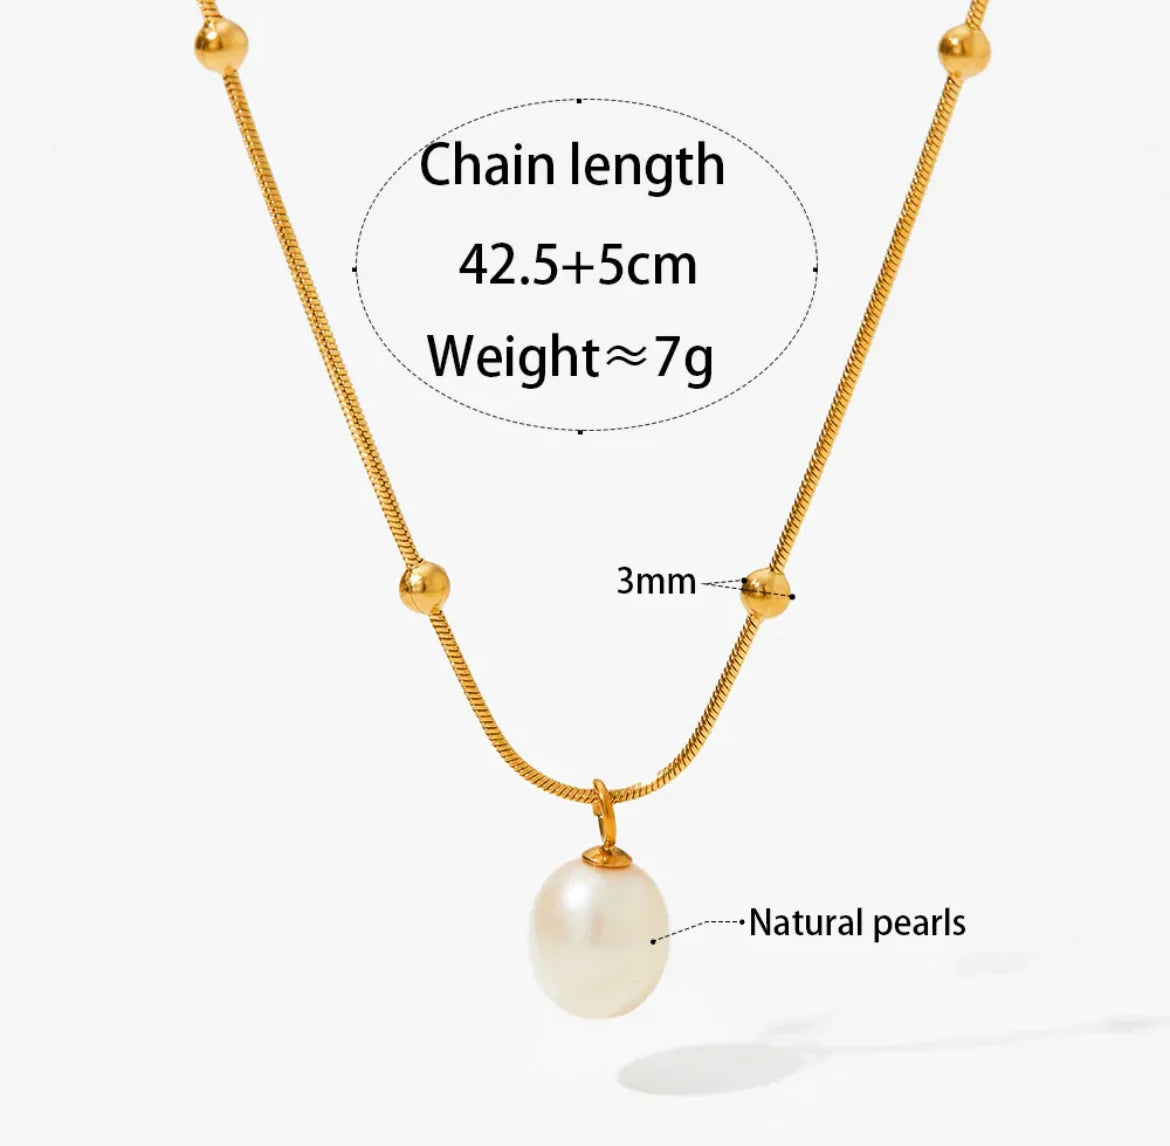 Boho & Mala Pearl Stainless Steel Pendant Necklace